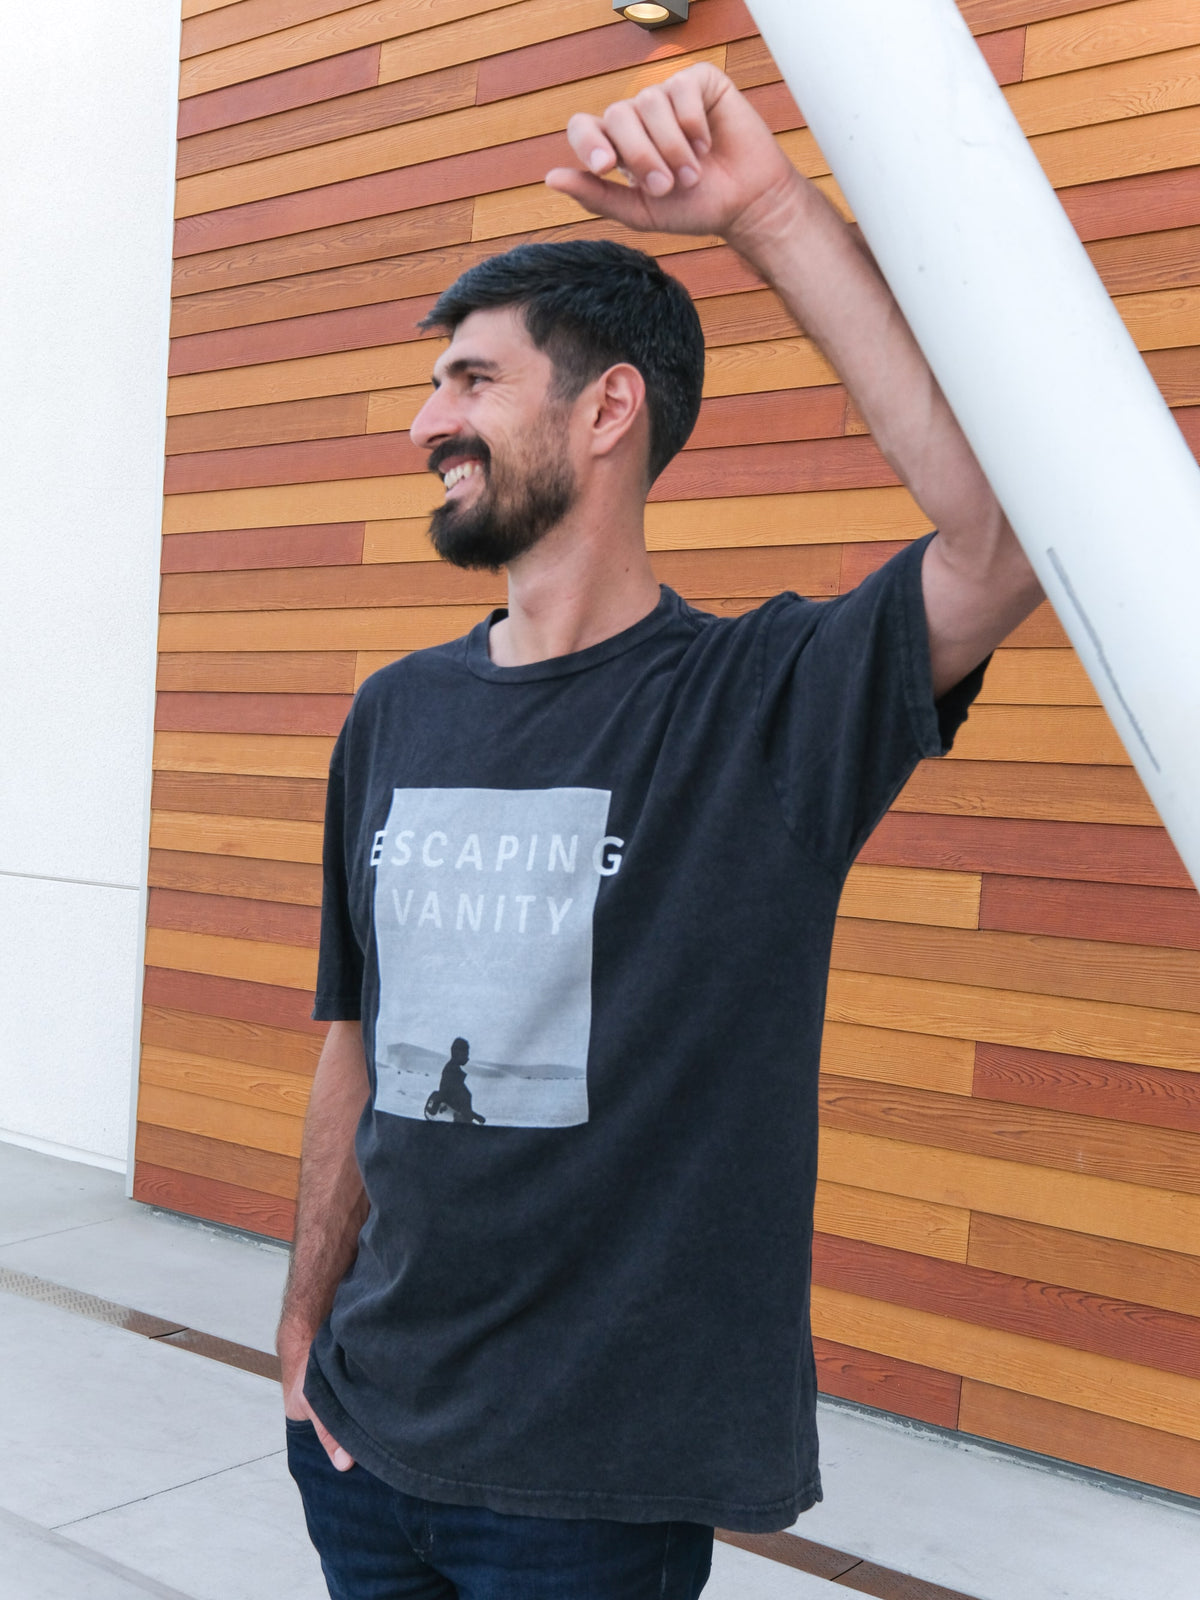 Christian Apparel - This "Band style Tee" is inspired by Ecclesiastes and the 'vanity of vanities' phrase repeated. We wanted to create a product that focuses on Escaping Vanity so we printed on this black washed tee those words along with a picture of a man walking in the dessert with his guitar.